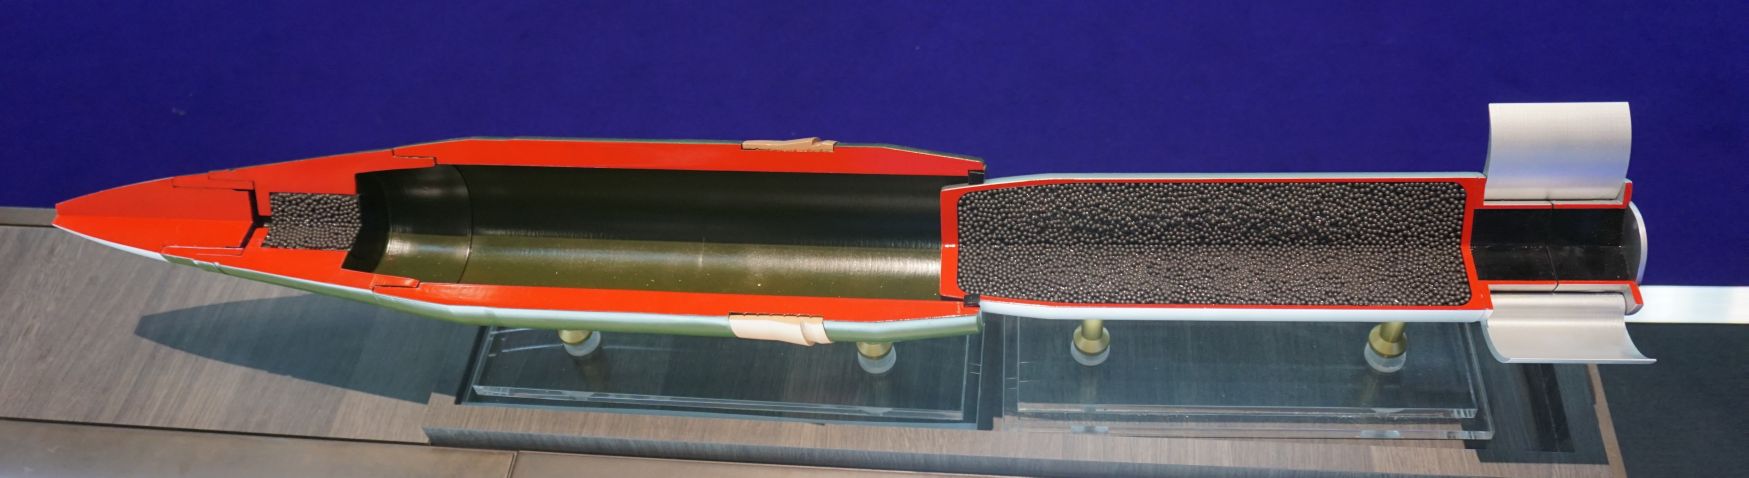 A cutaway model showing the Kingfisher round’s internal components, including fuze, expulsion charge, and submunition. (IHSMarkit/Mark Cazalet)